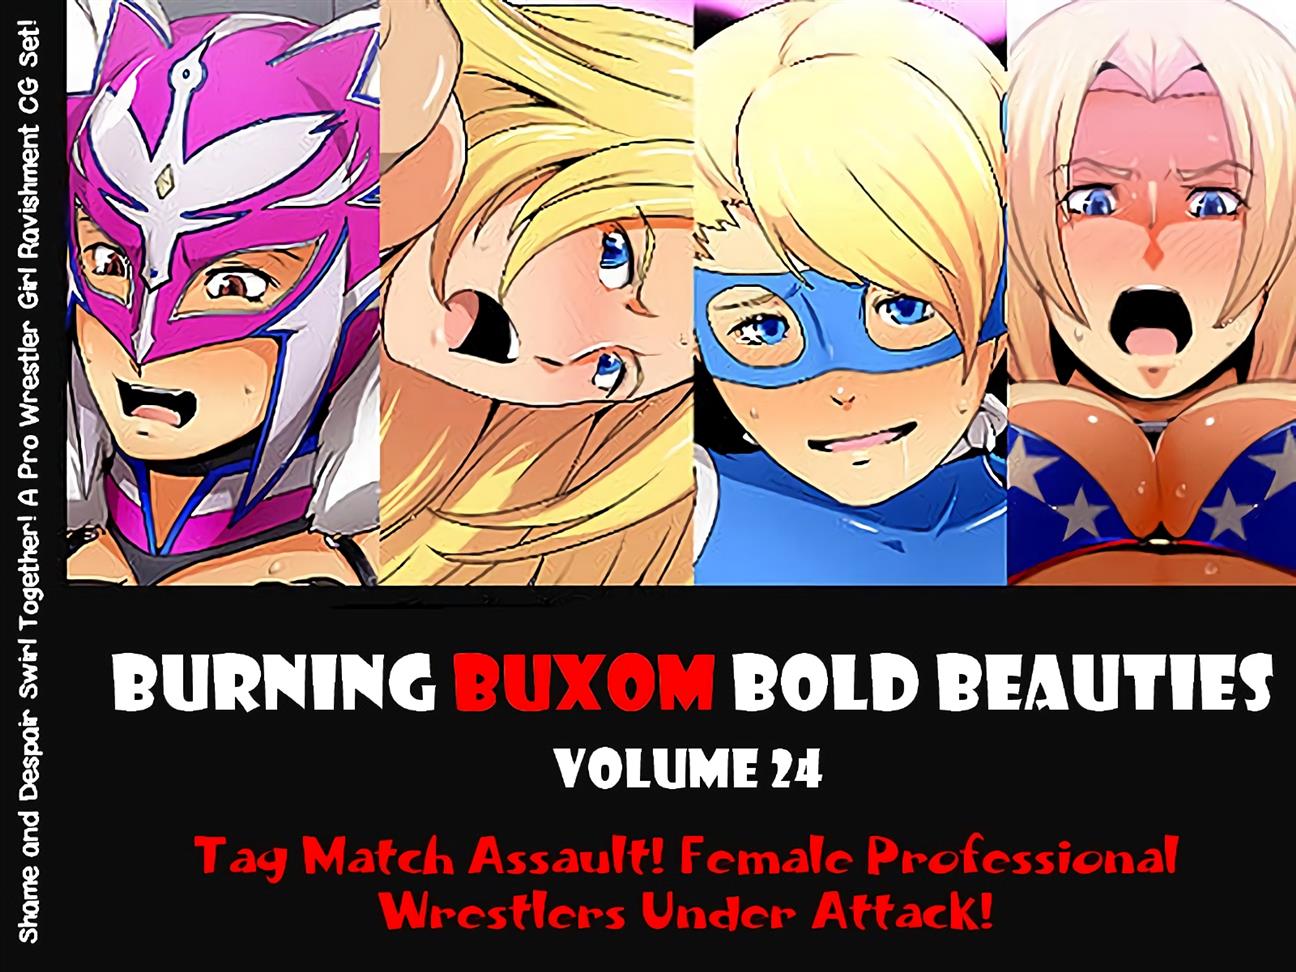 BURNING BUXOM BOLD BEAUTIES VOLUME 24 Tag Match Assault! Female Professionals Wrestlers Under Attack!